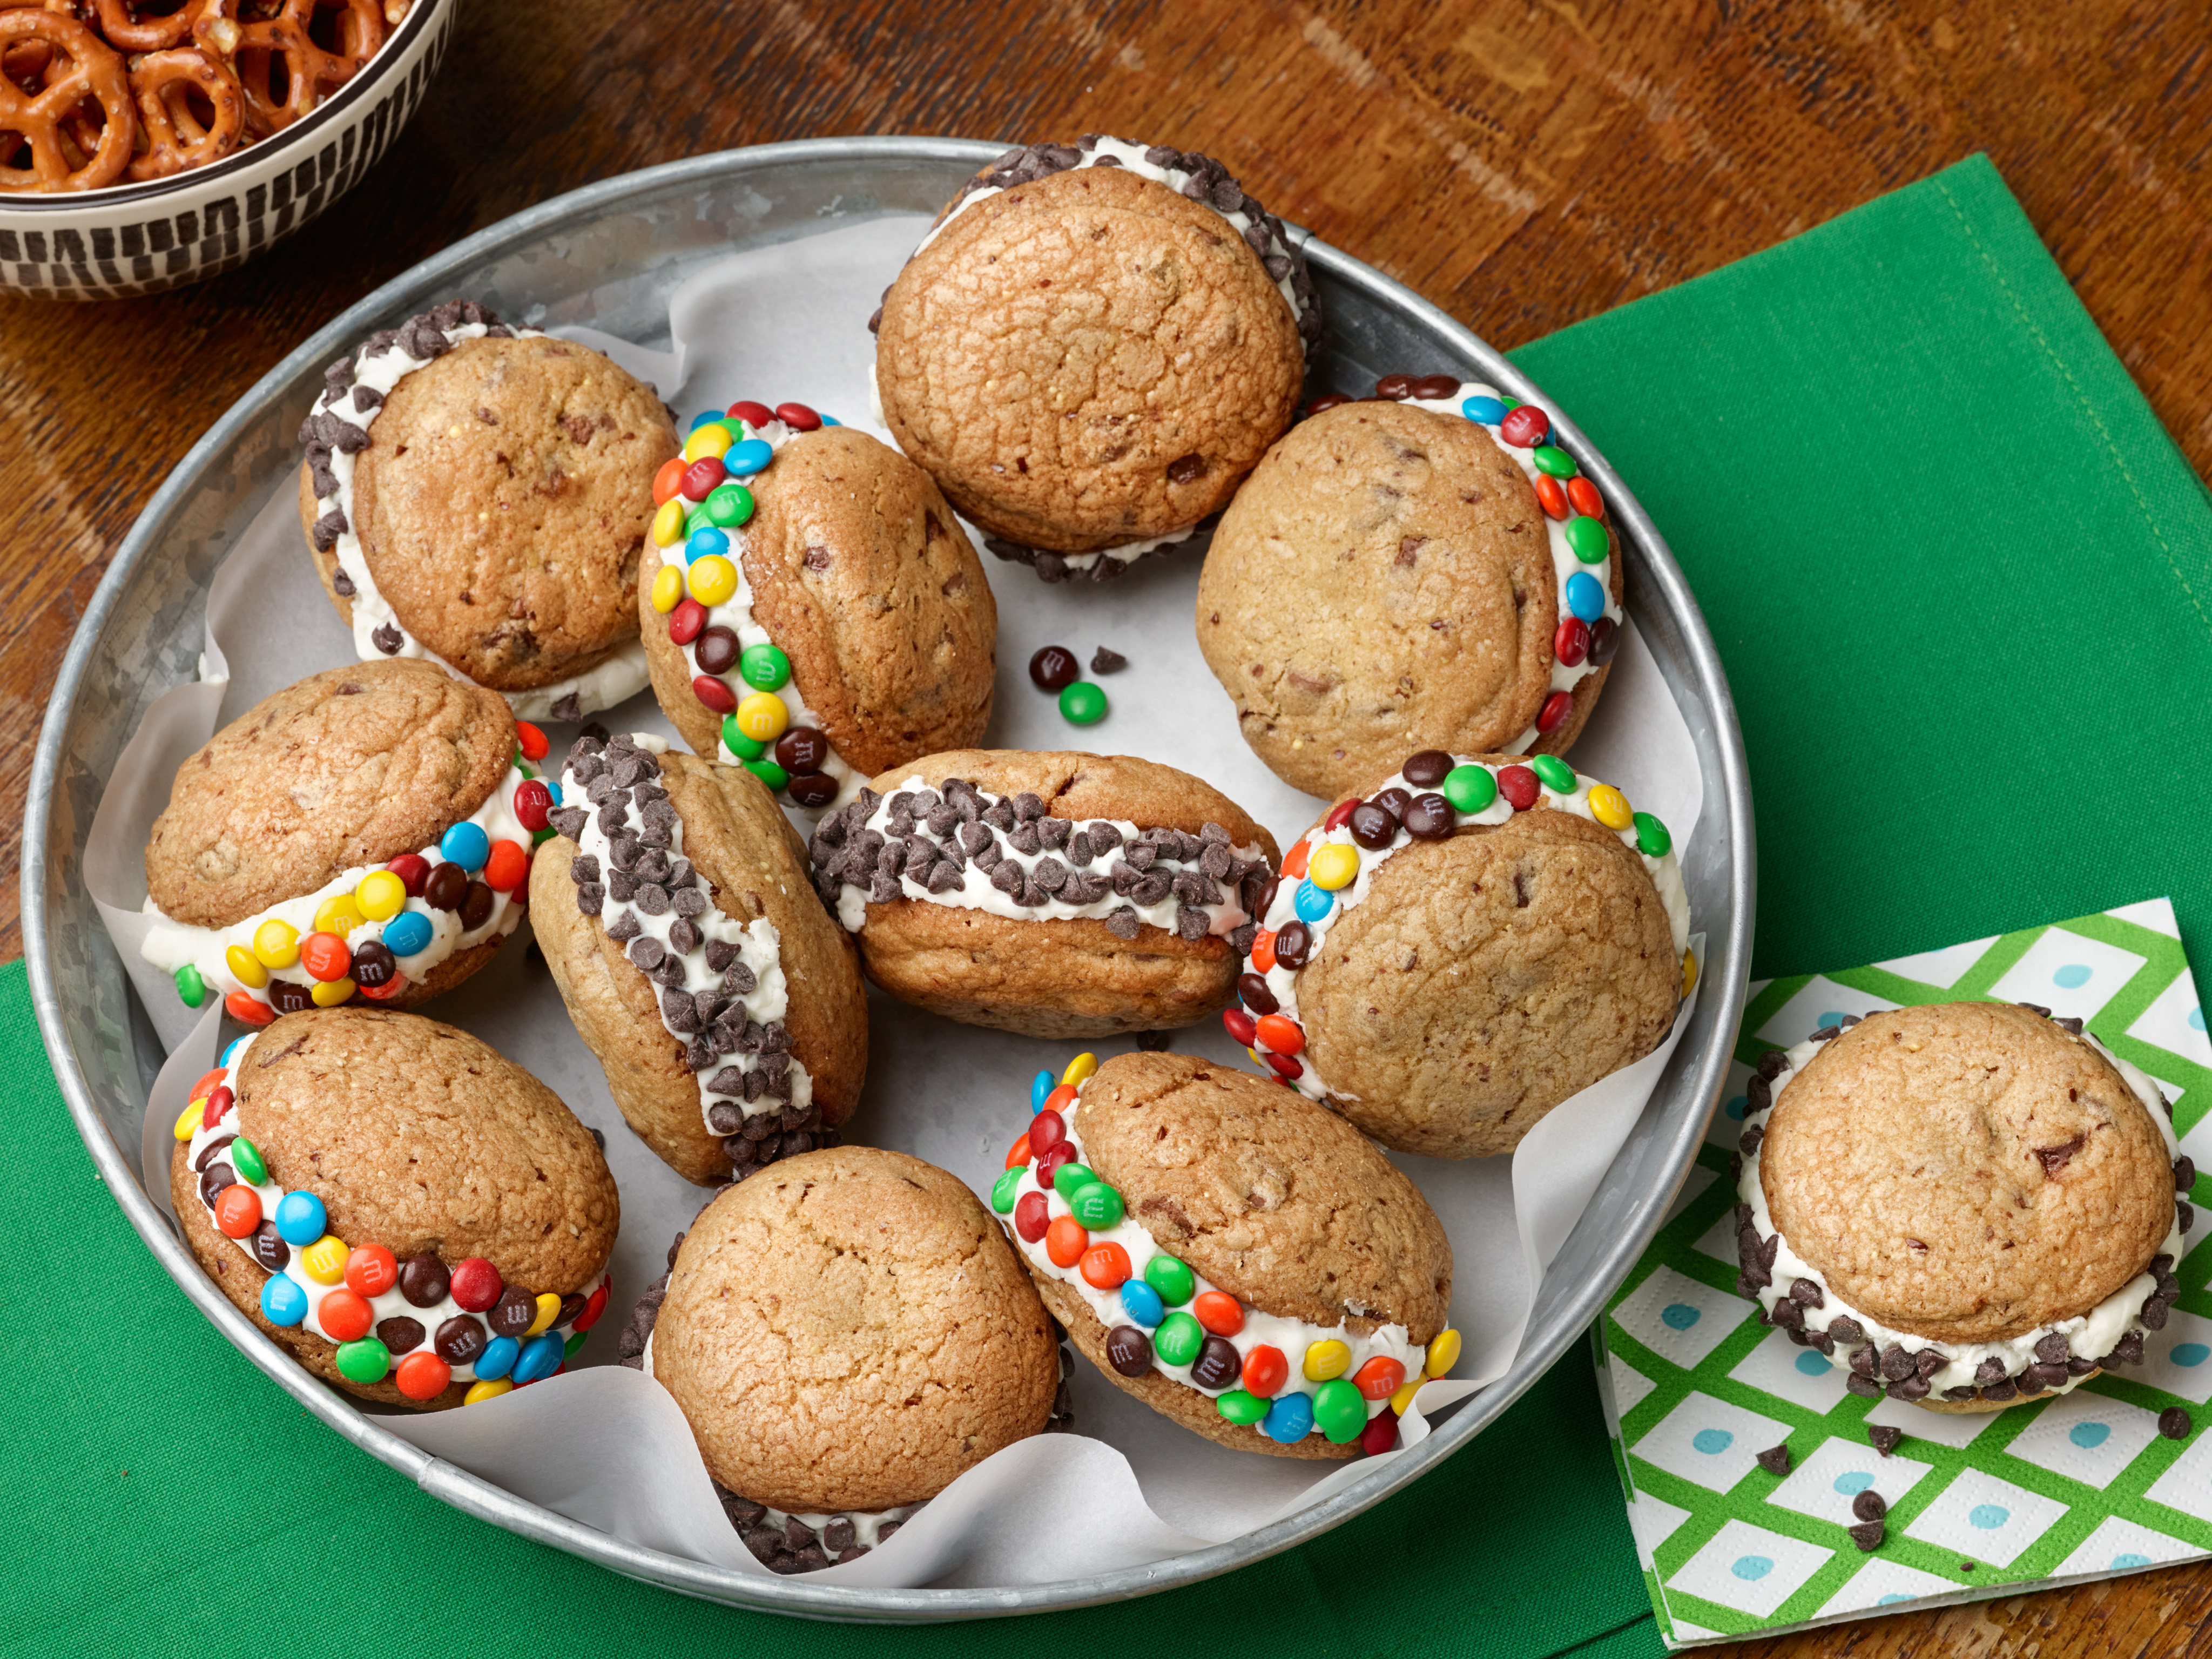 https://www.foodnetwork.com/content/dam/images/food/fullset/2013/2/8/0/WU0403H_chocolate-chip-cookie-ice-cream-sandwiches-recipe_s4x3.jpg